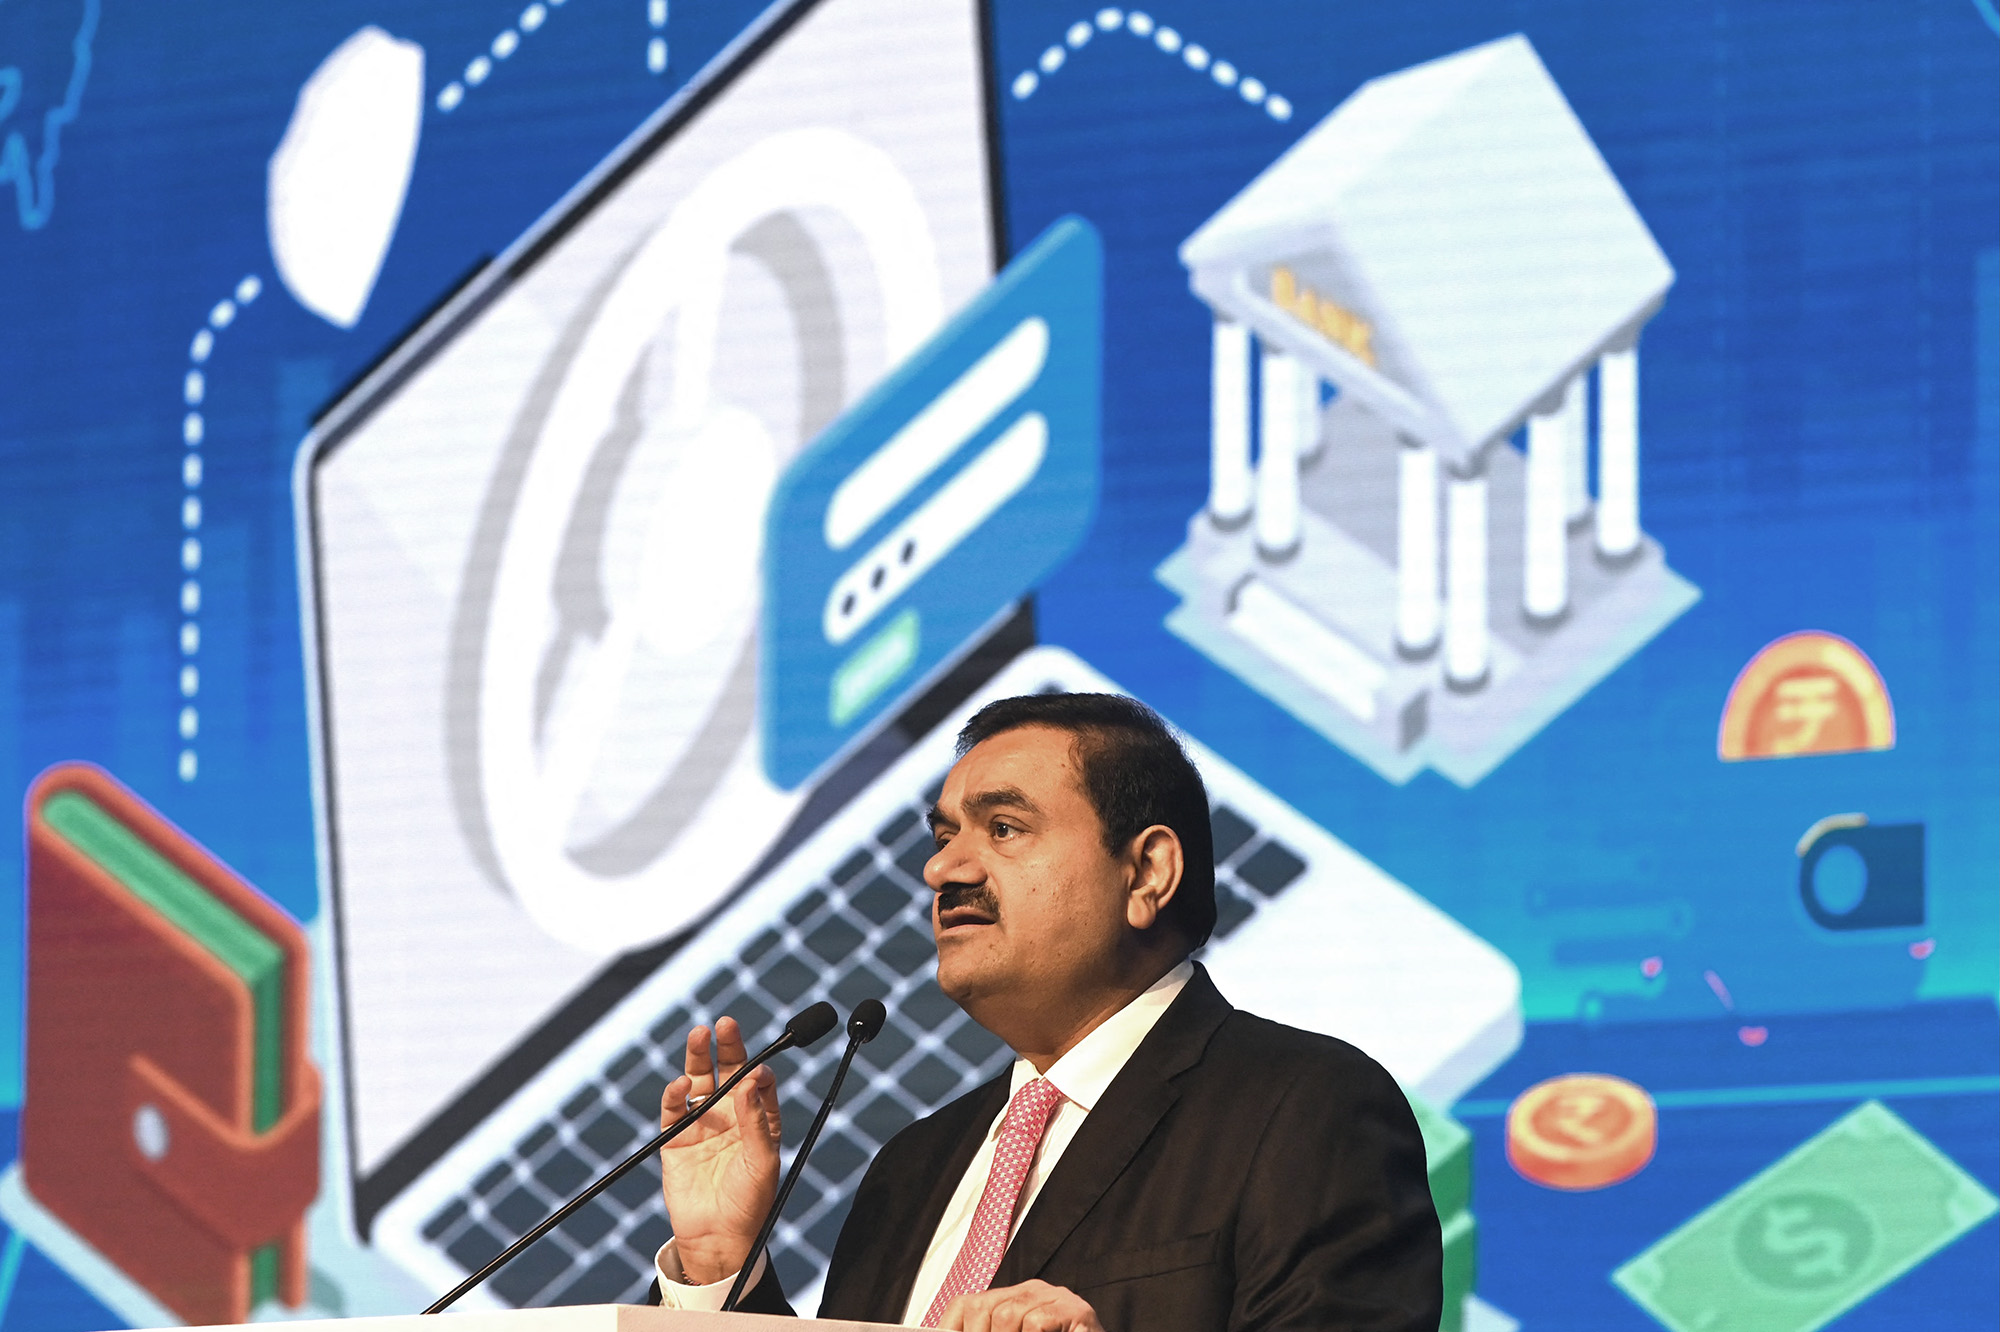 Who is Gautam Adani? What are some interesting facts about his business  empire? - Quora